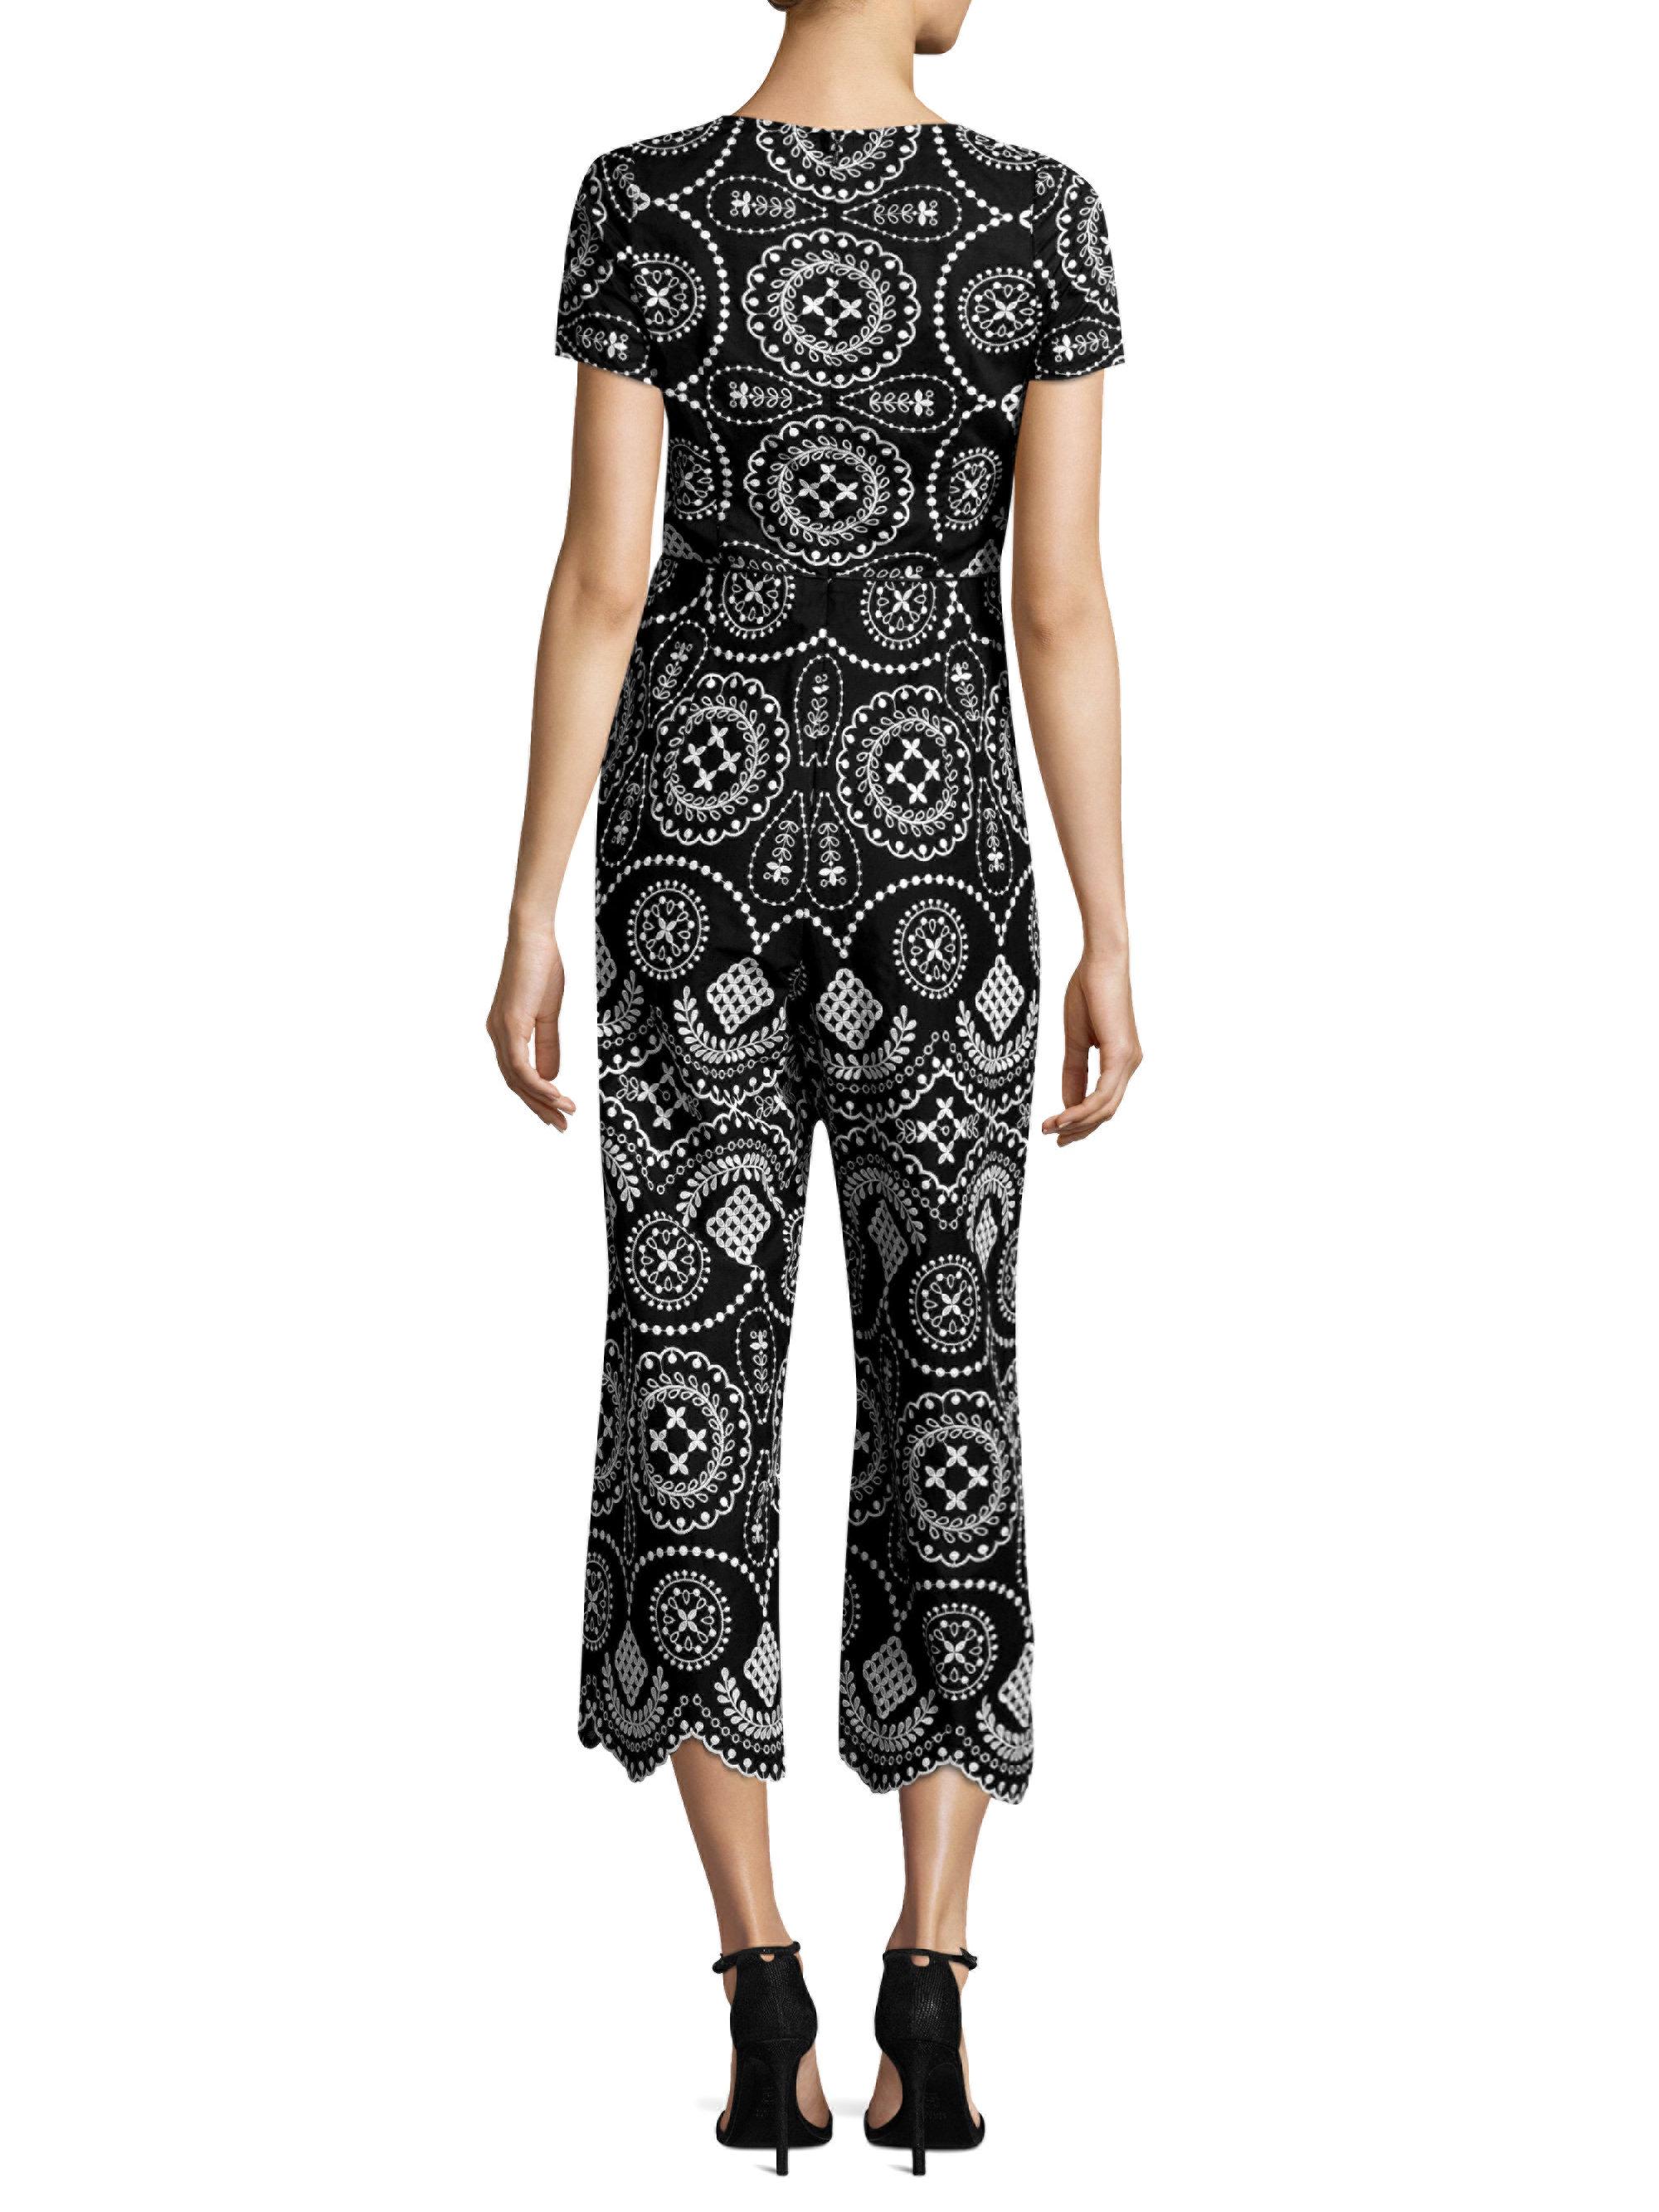 Lyst - Alice Mccall Crave You Jumpsuit in Black